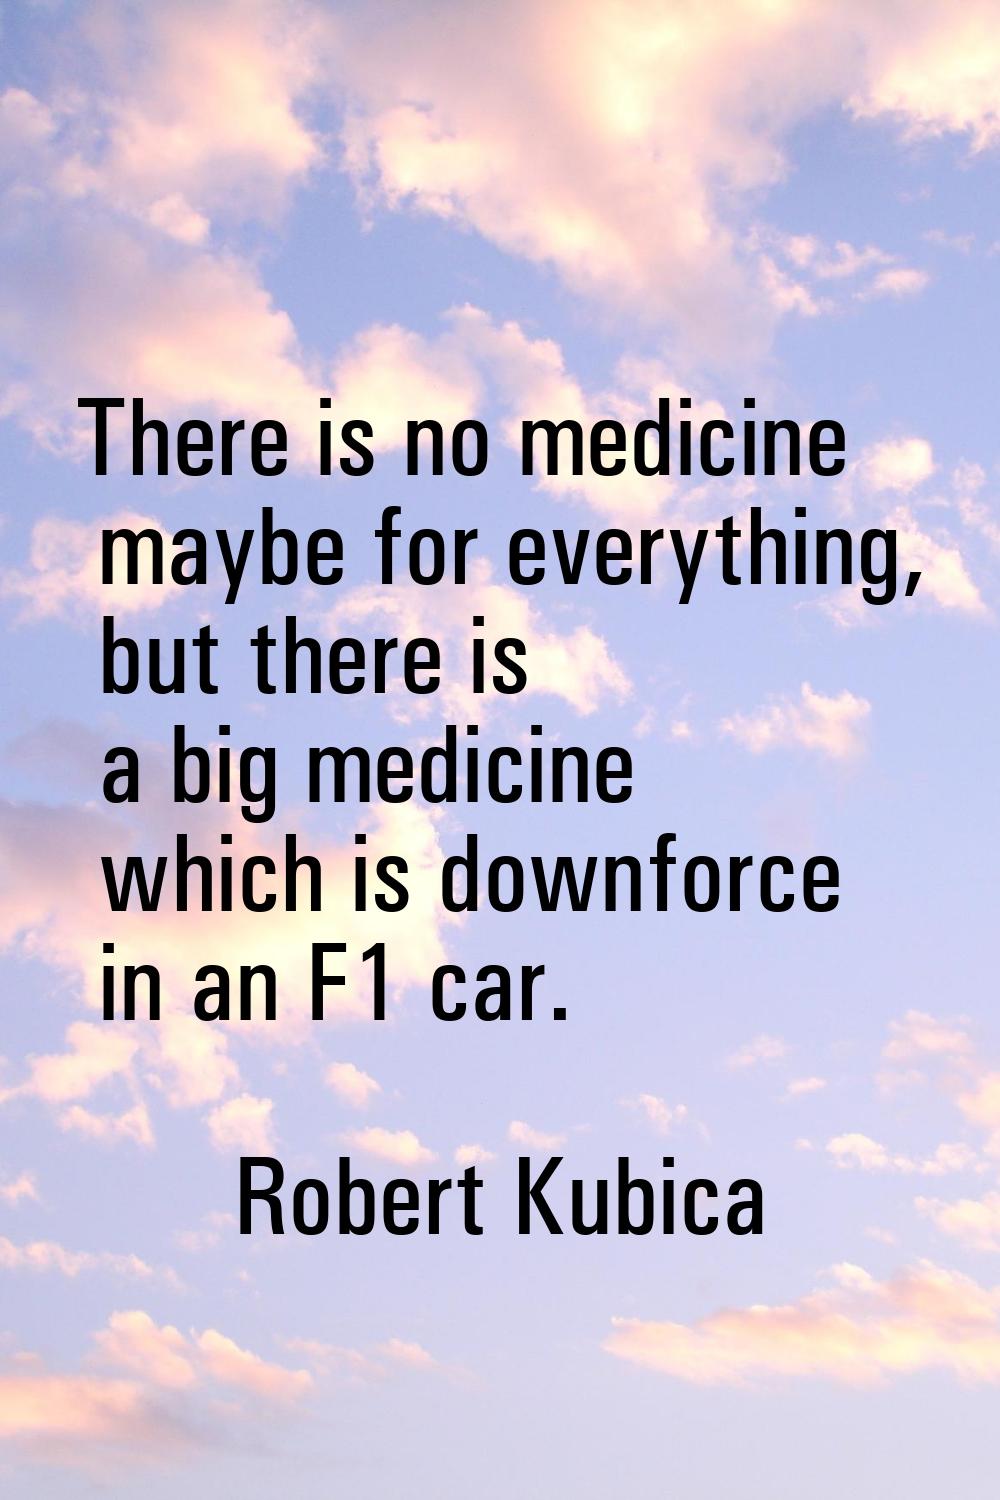 There is no medicine maybe for everything, but there is a big medicine which is downforce in an F1 